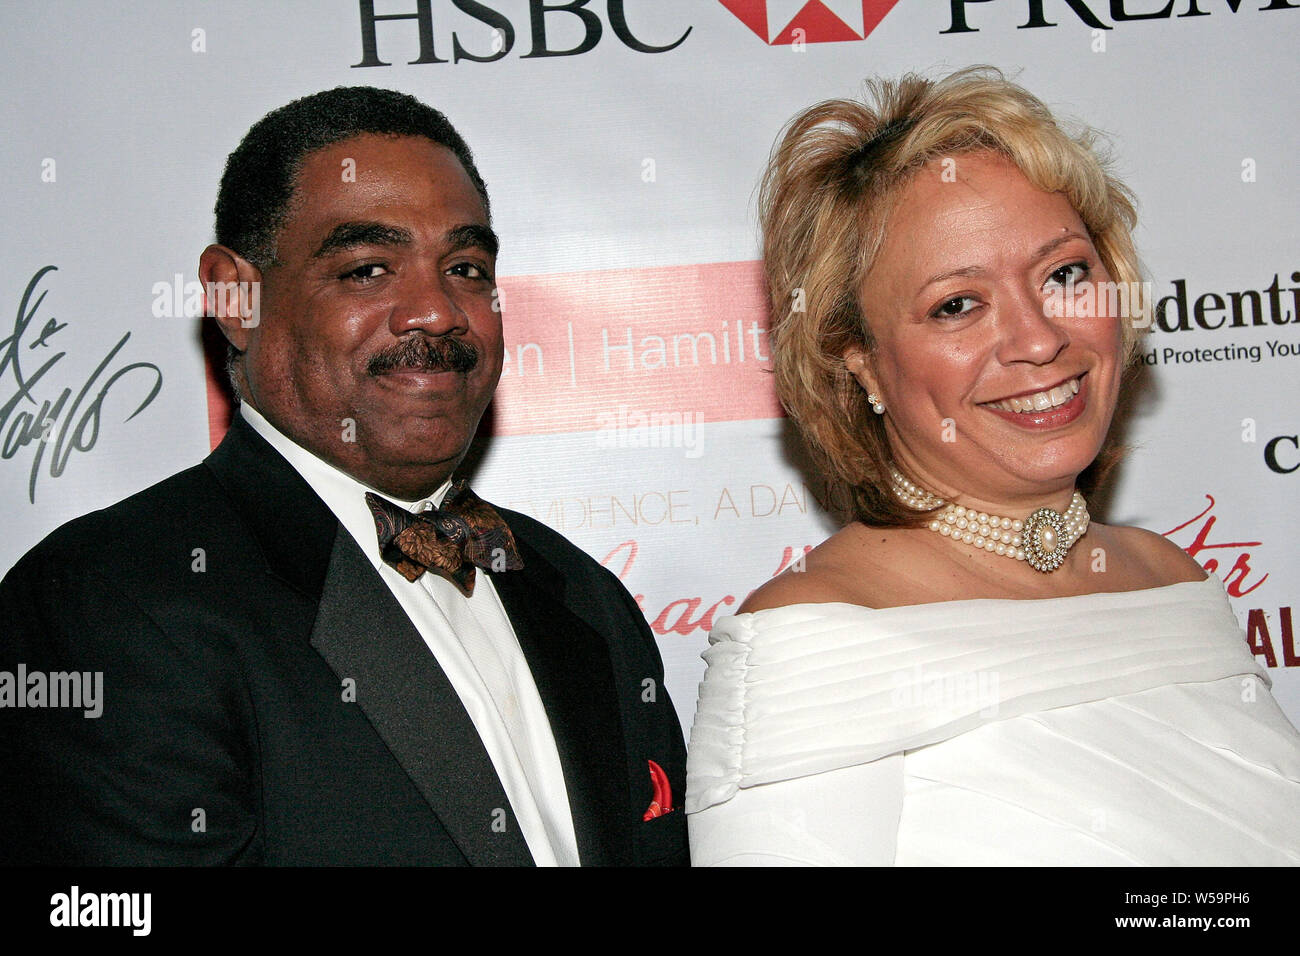 New York, USA. 11 February, 2008. Darney Phipps, Nancy Armand-Phipps at the Red Ball: Evidence's 'Grace in Winter' gala at The Hudson Theater, Millennium Broadway Hotel. Credit: Steve Mack/Alamy Stock Photo